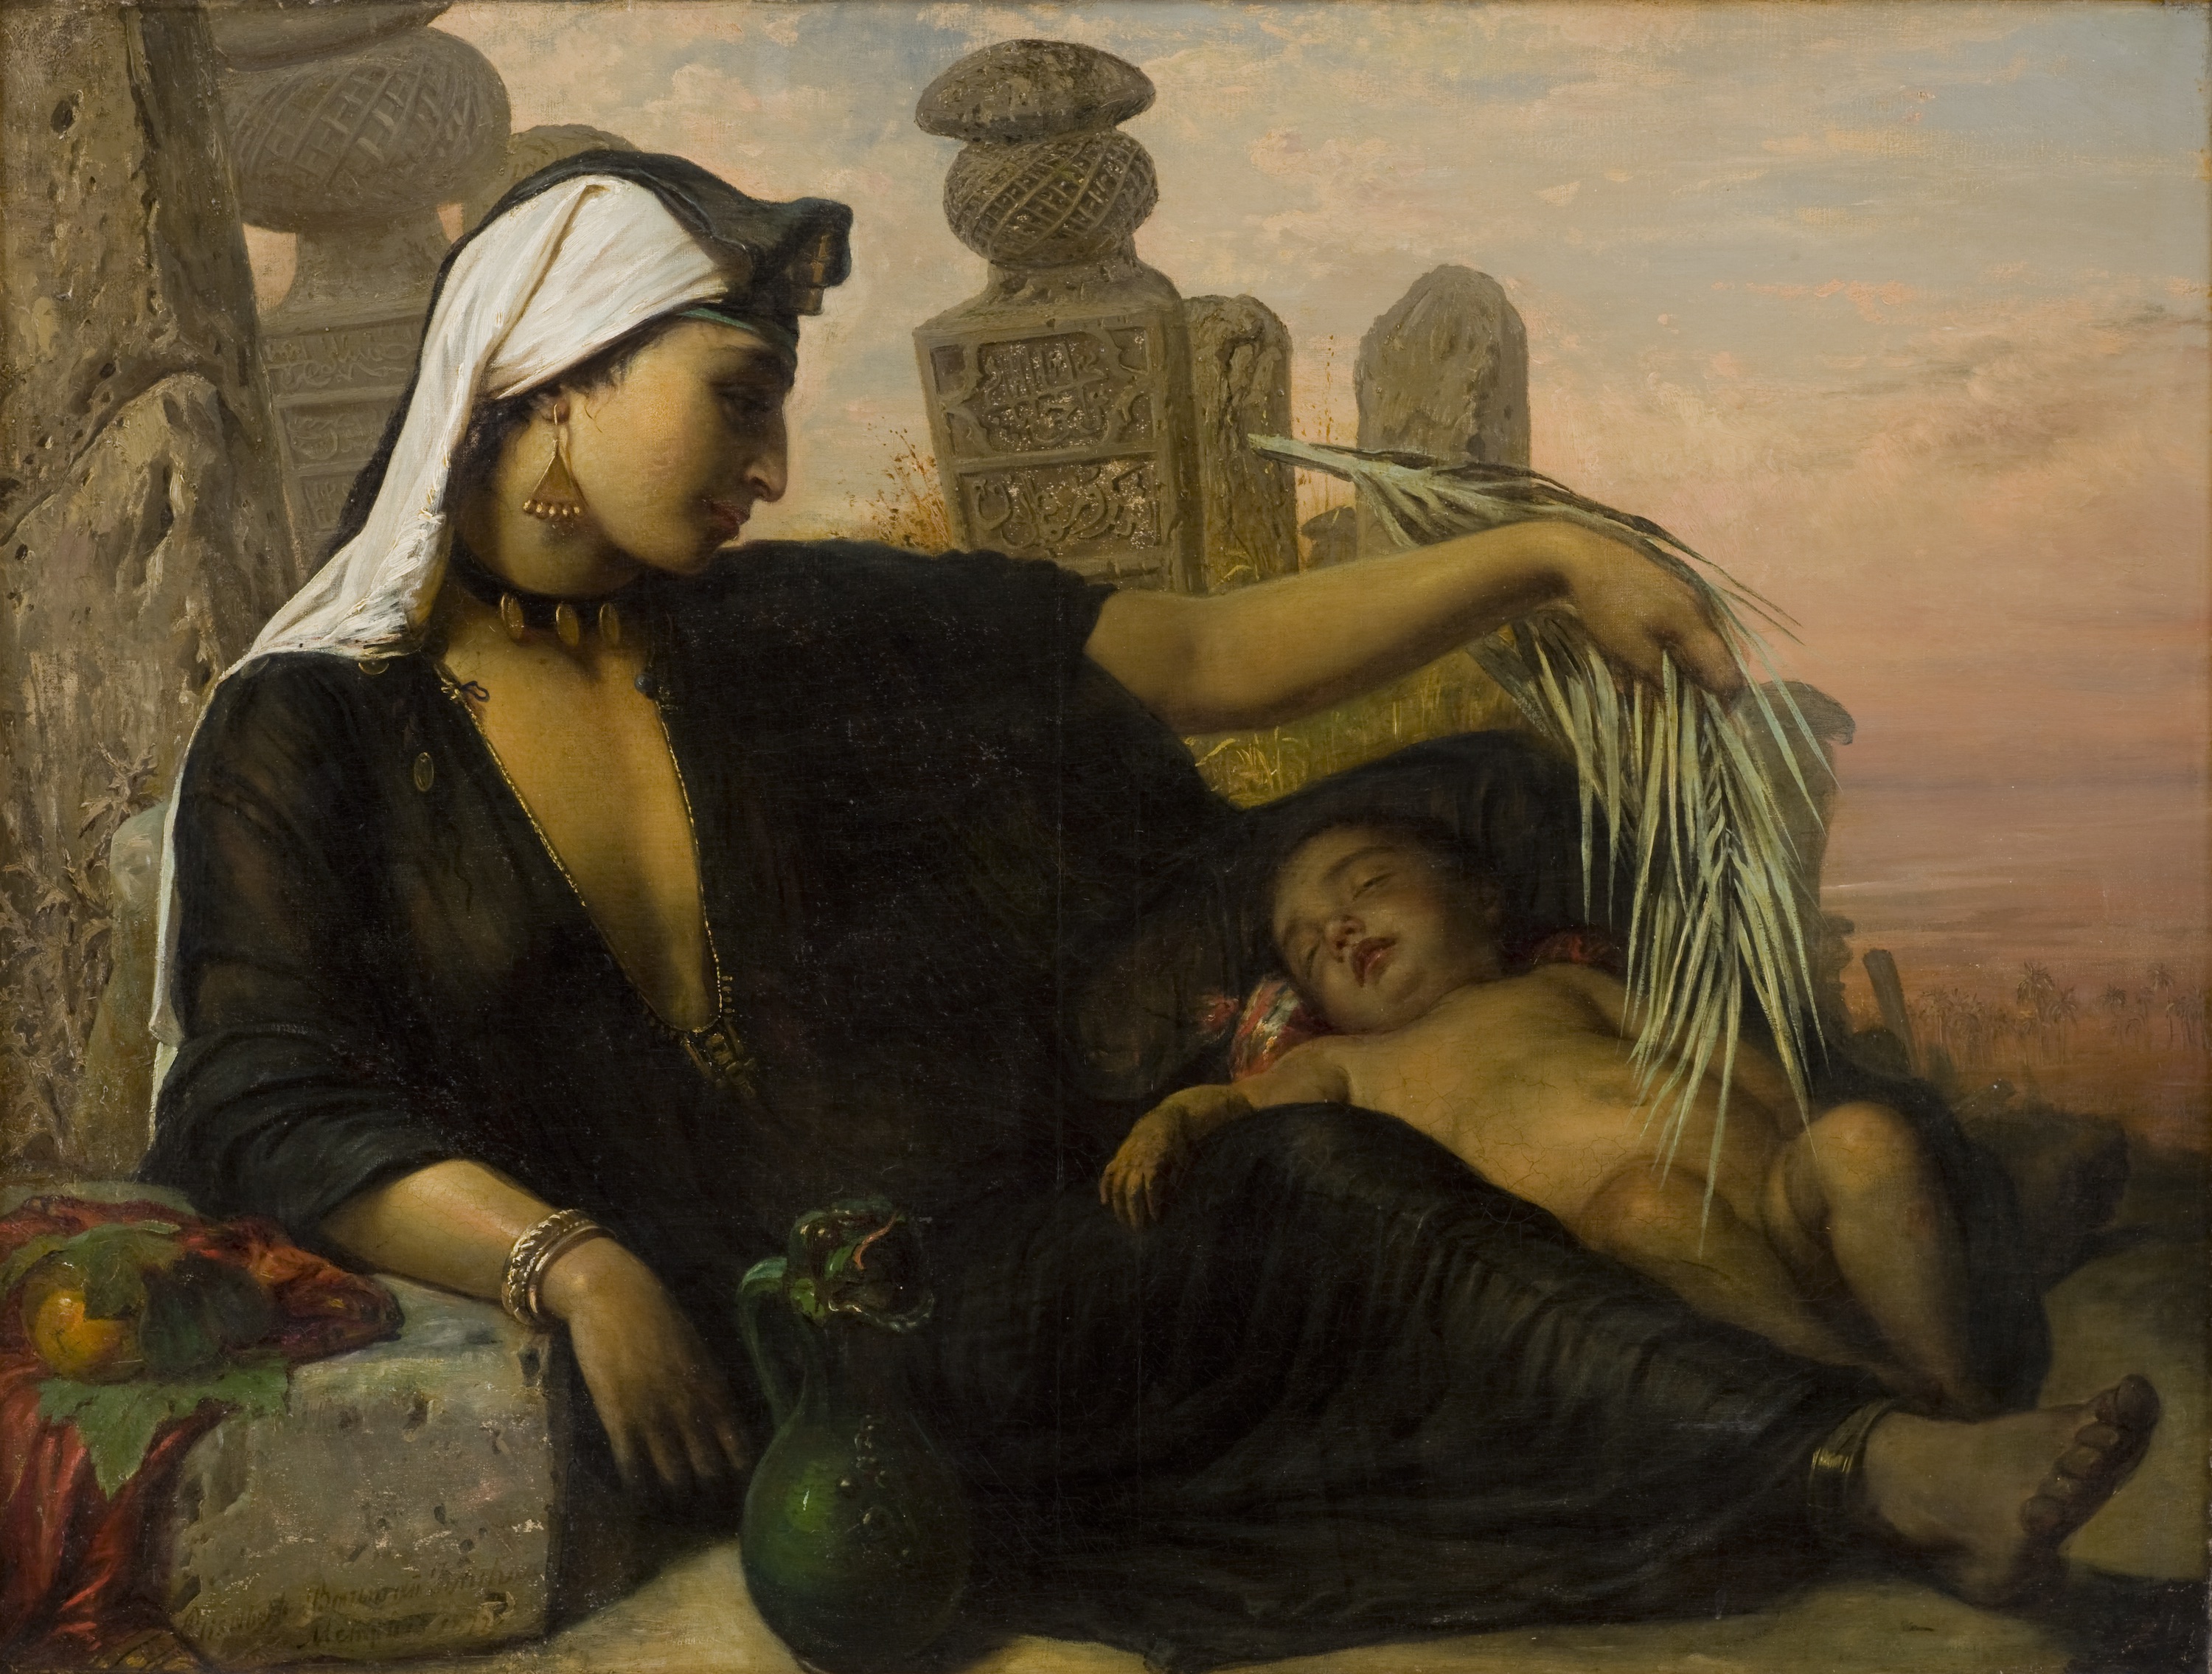 An Egyptian Fellah Woman with her Baby by Elisabeth Jerichau Baumann - 1872 - 98.5 x 129.2 cm Statens Museum for Kunst